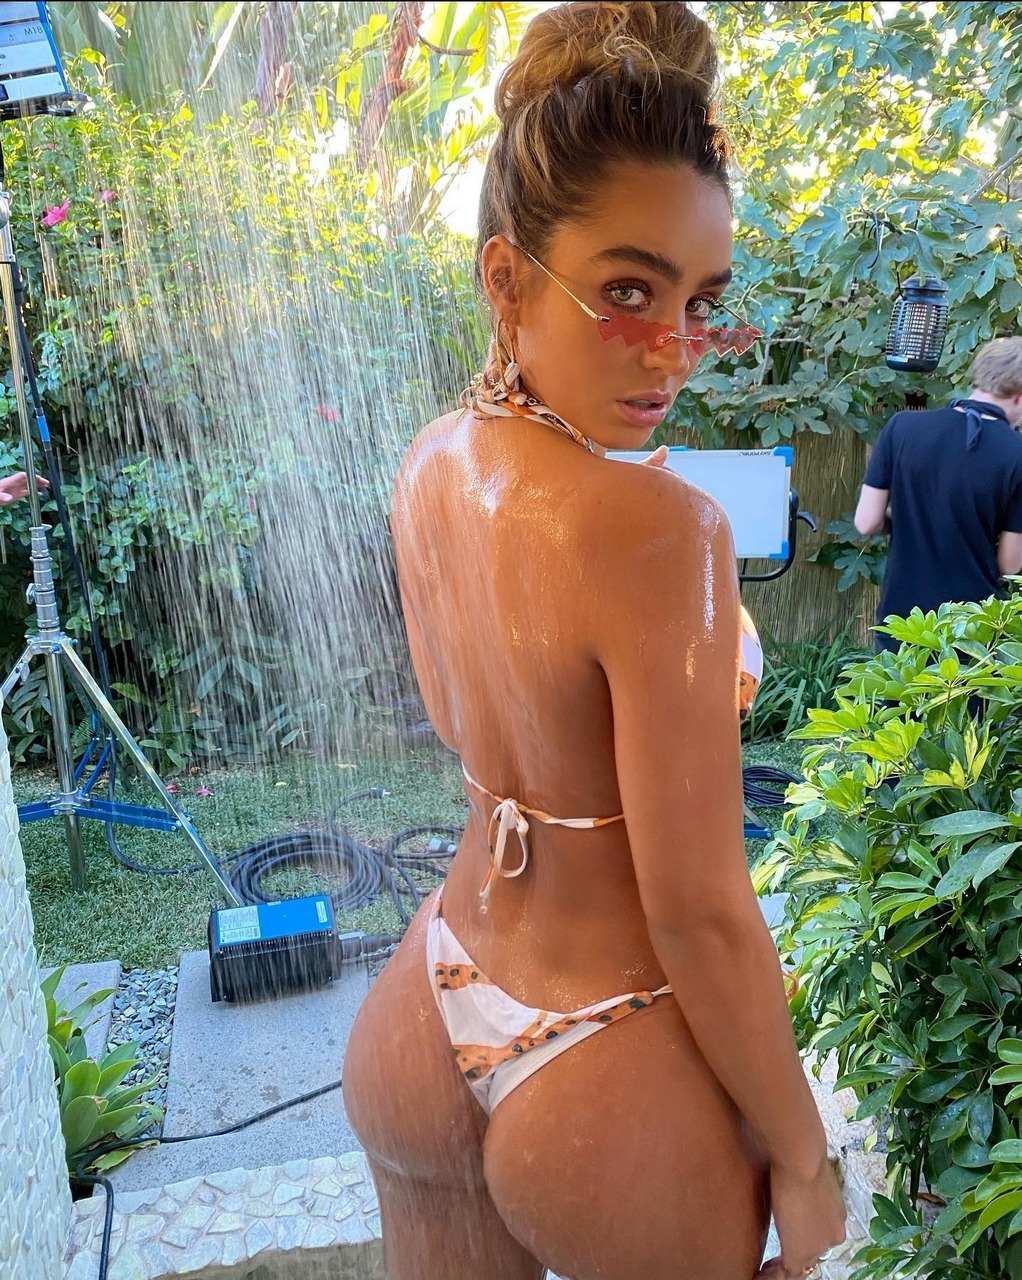 Sommer Ray Hot